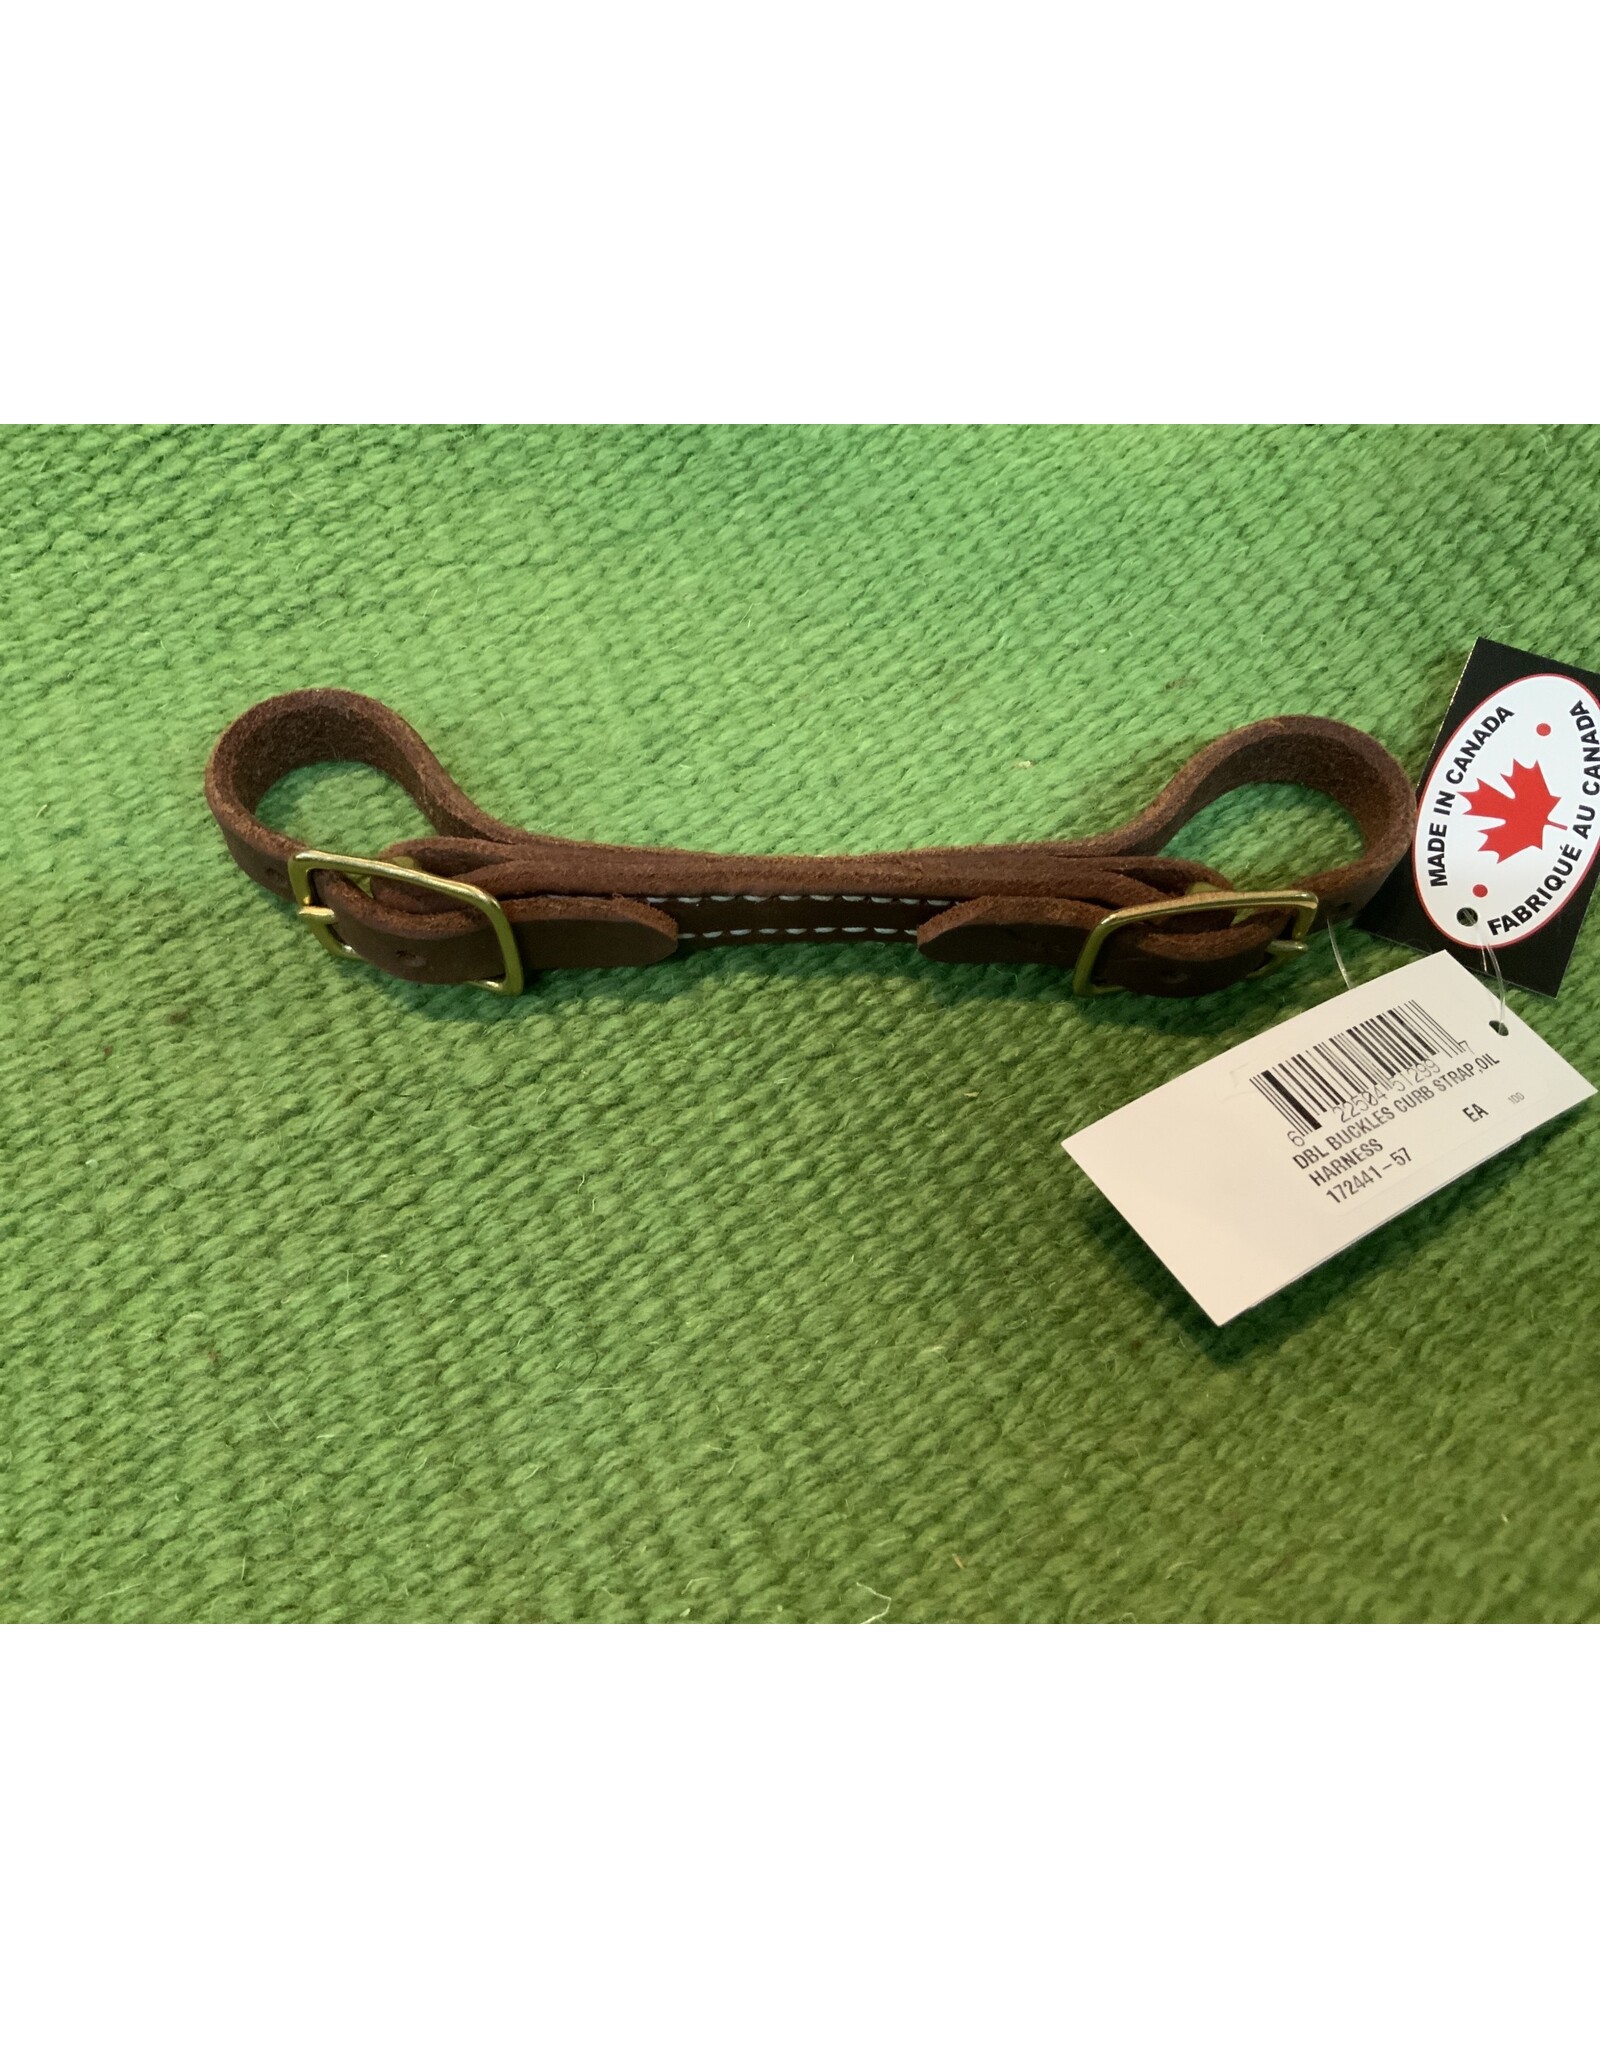 Western Rawhide Harness Leather 5/8"  Curb Strap - Oil Harness - 172441-57